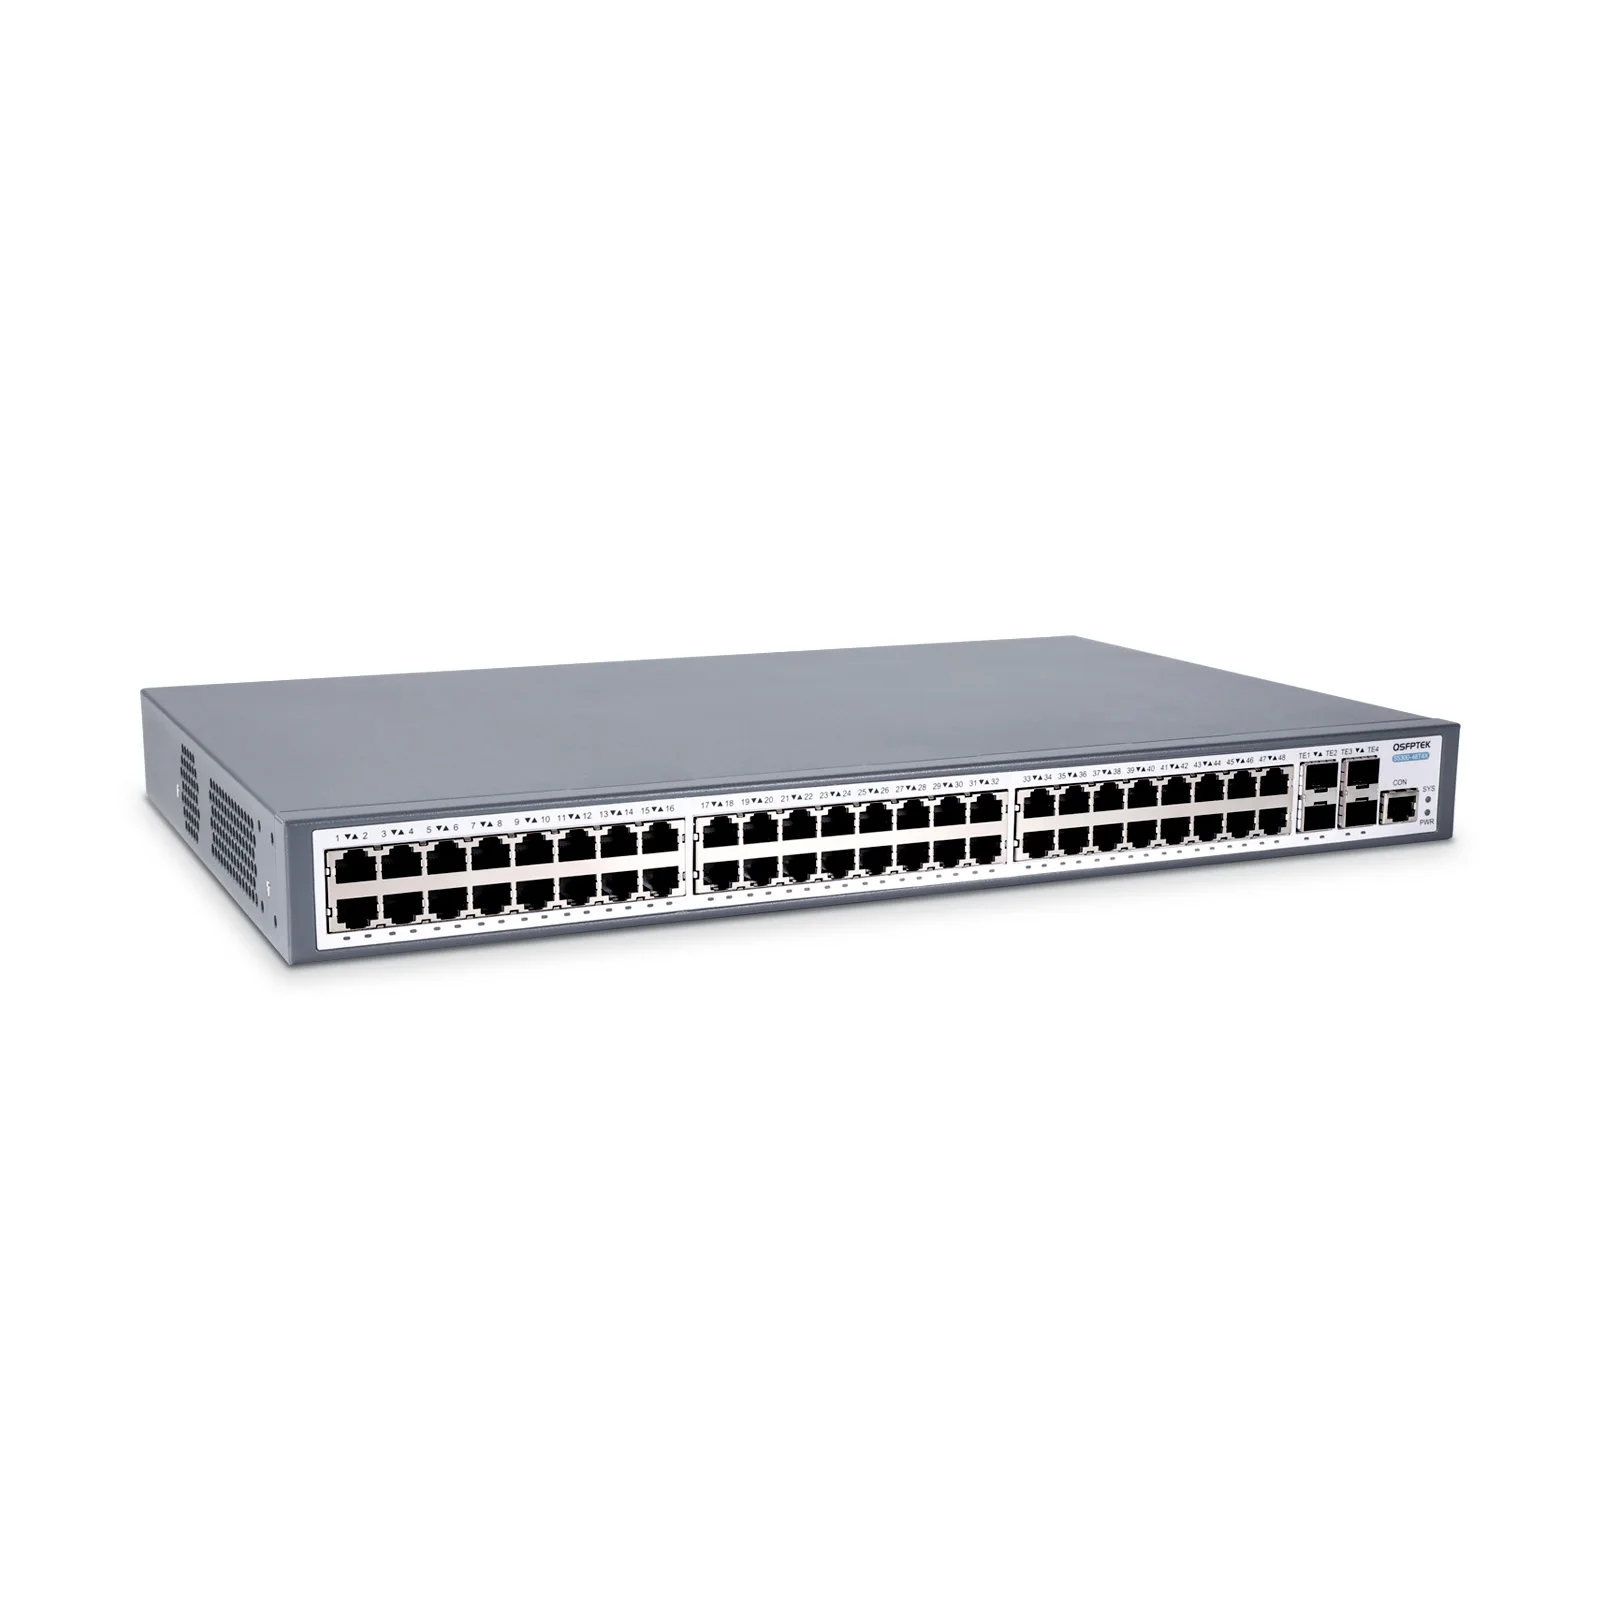 10GbE Switch 48 Ports: Choose SFP Switch or Copper Switch